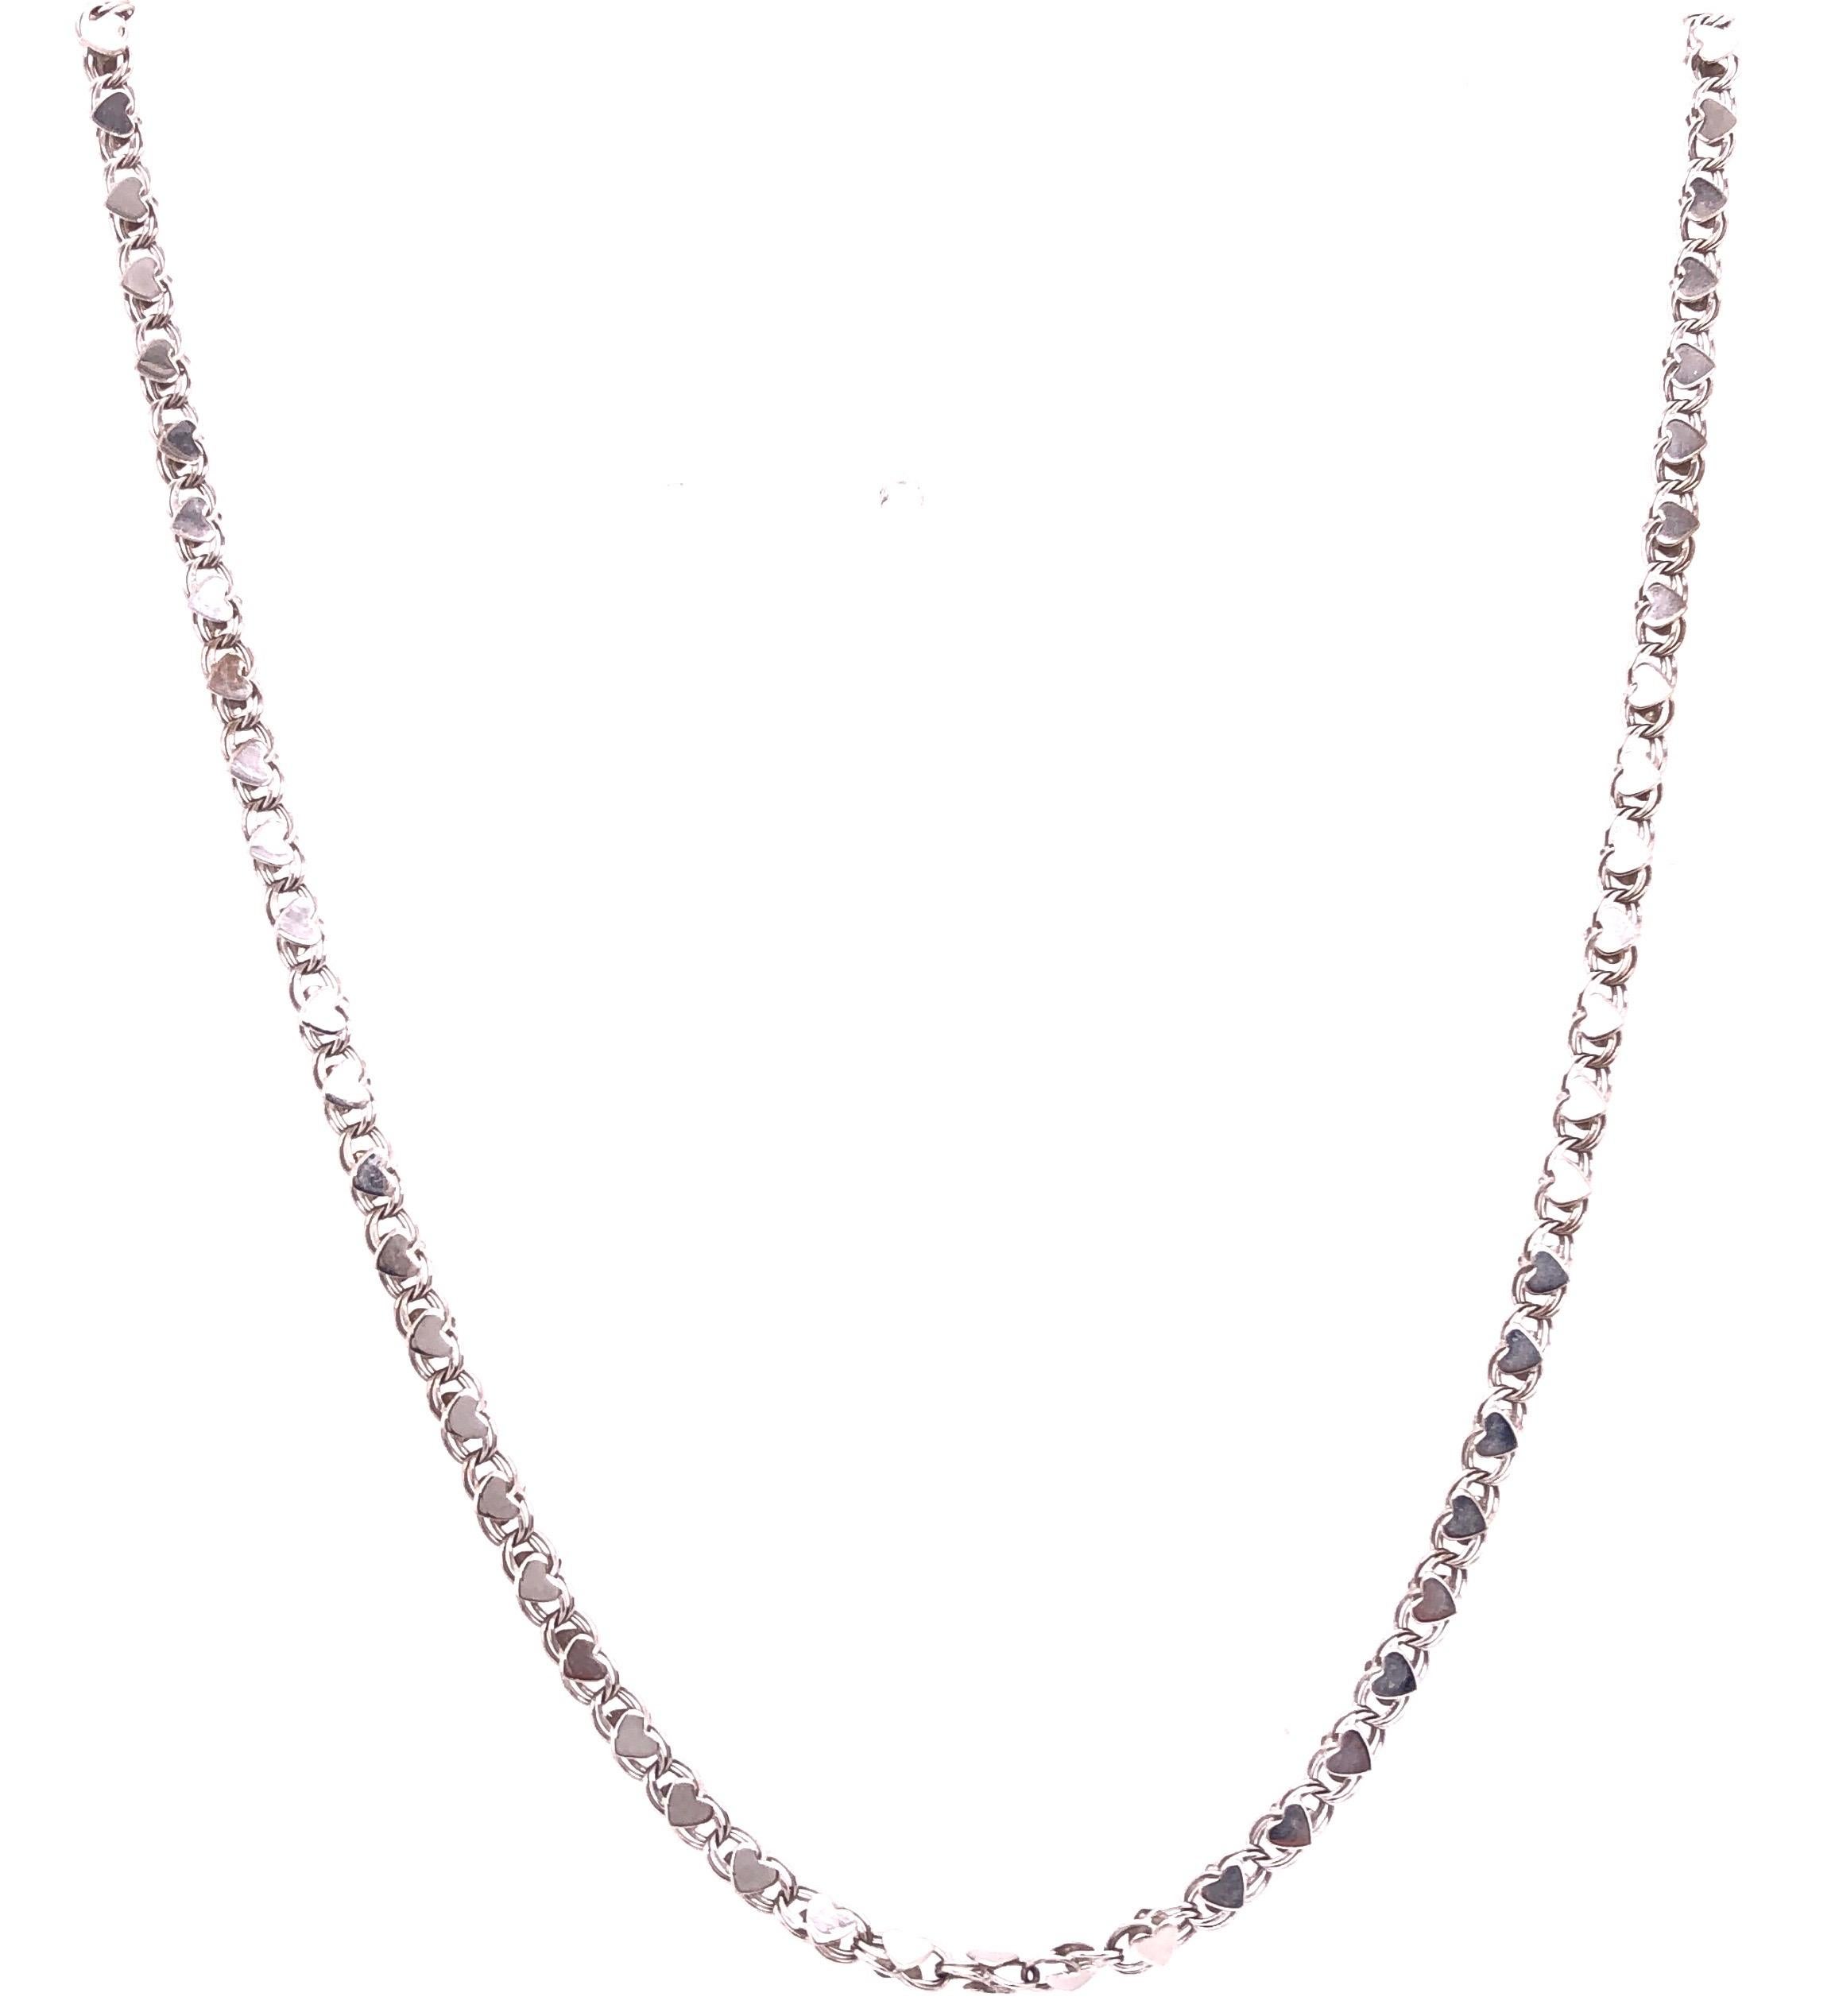 14Kt White Gold 16 inch Fancy Link Necklace 
5.92 grams total weight